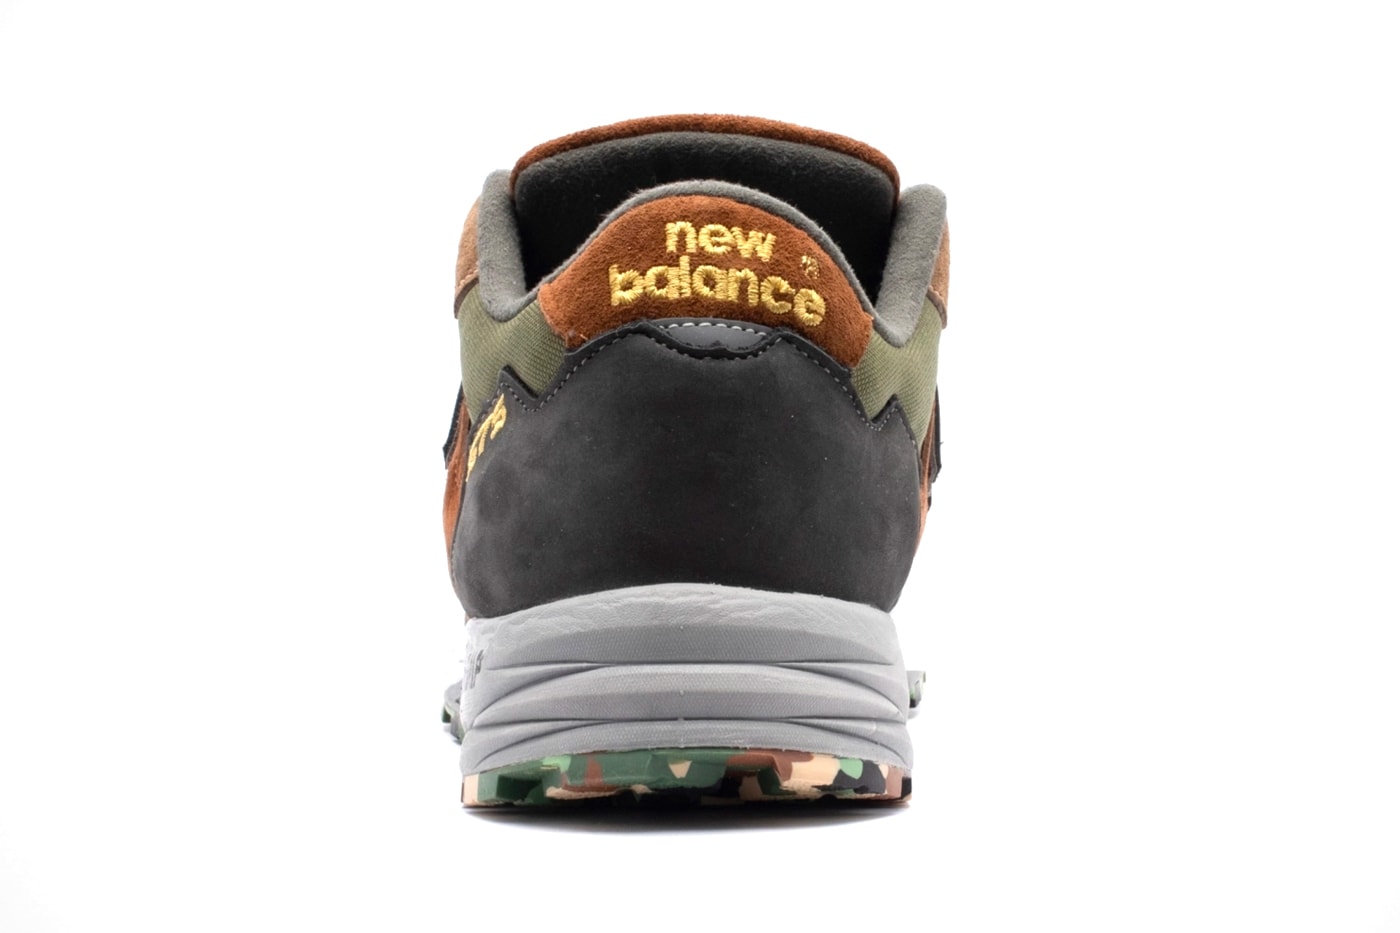 New Balance MTL575SO Camo Pack sneakers footwear shoes trainers runners vibram sole camouflage military filmby cumbria handmade